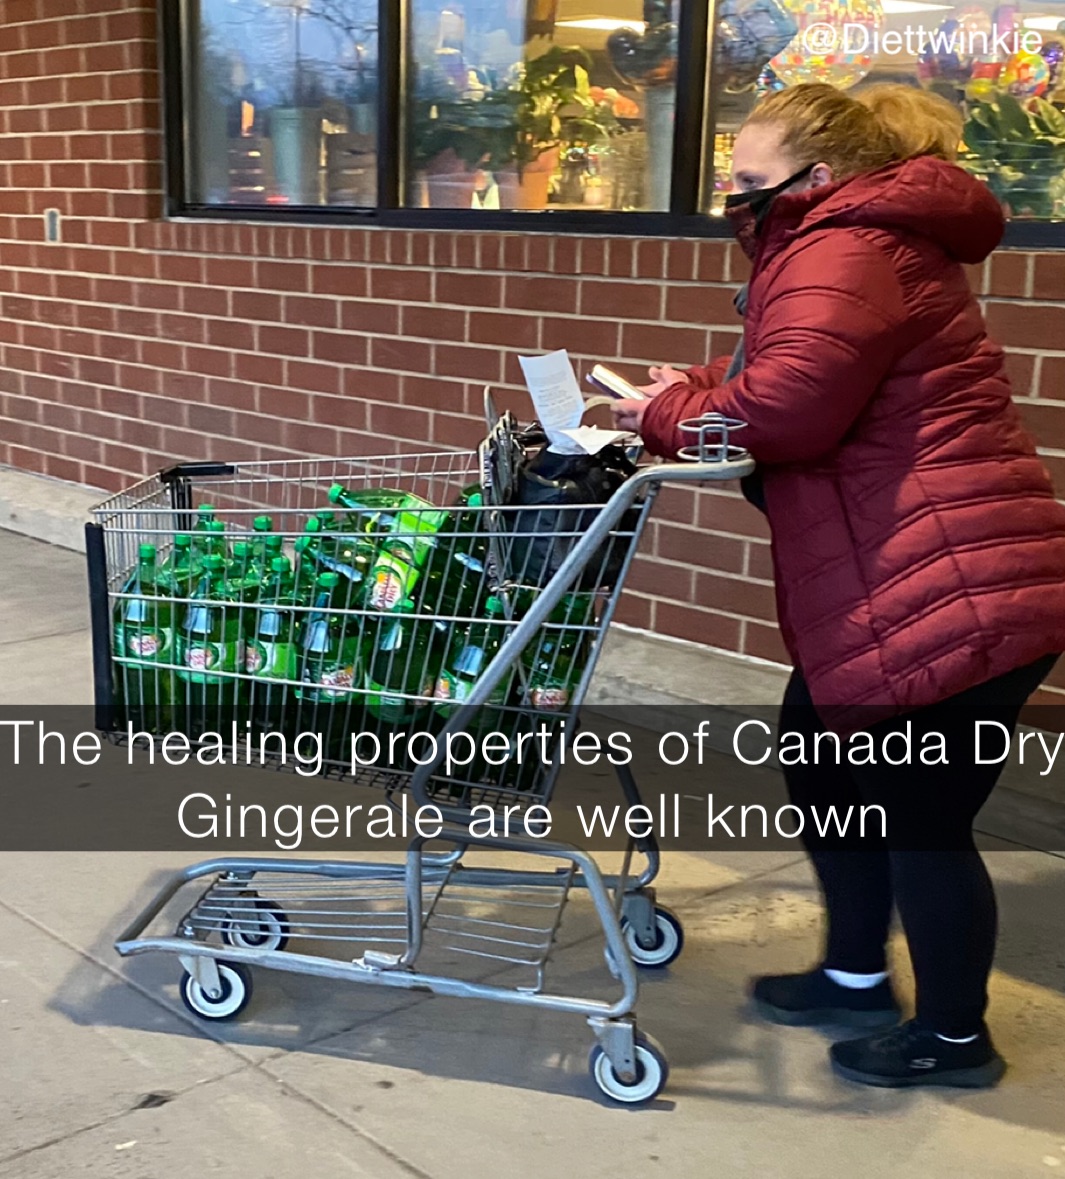 The healing properties of Canada Dry Gingerale are well known